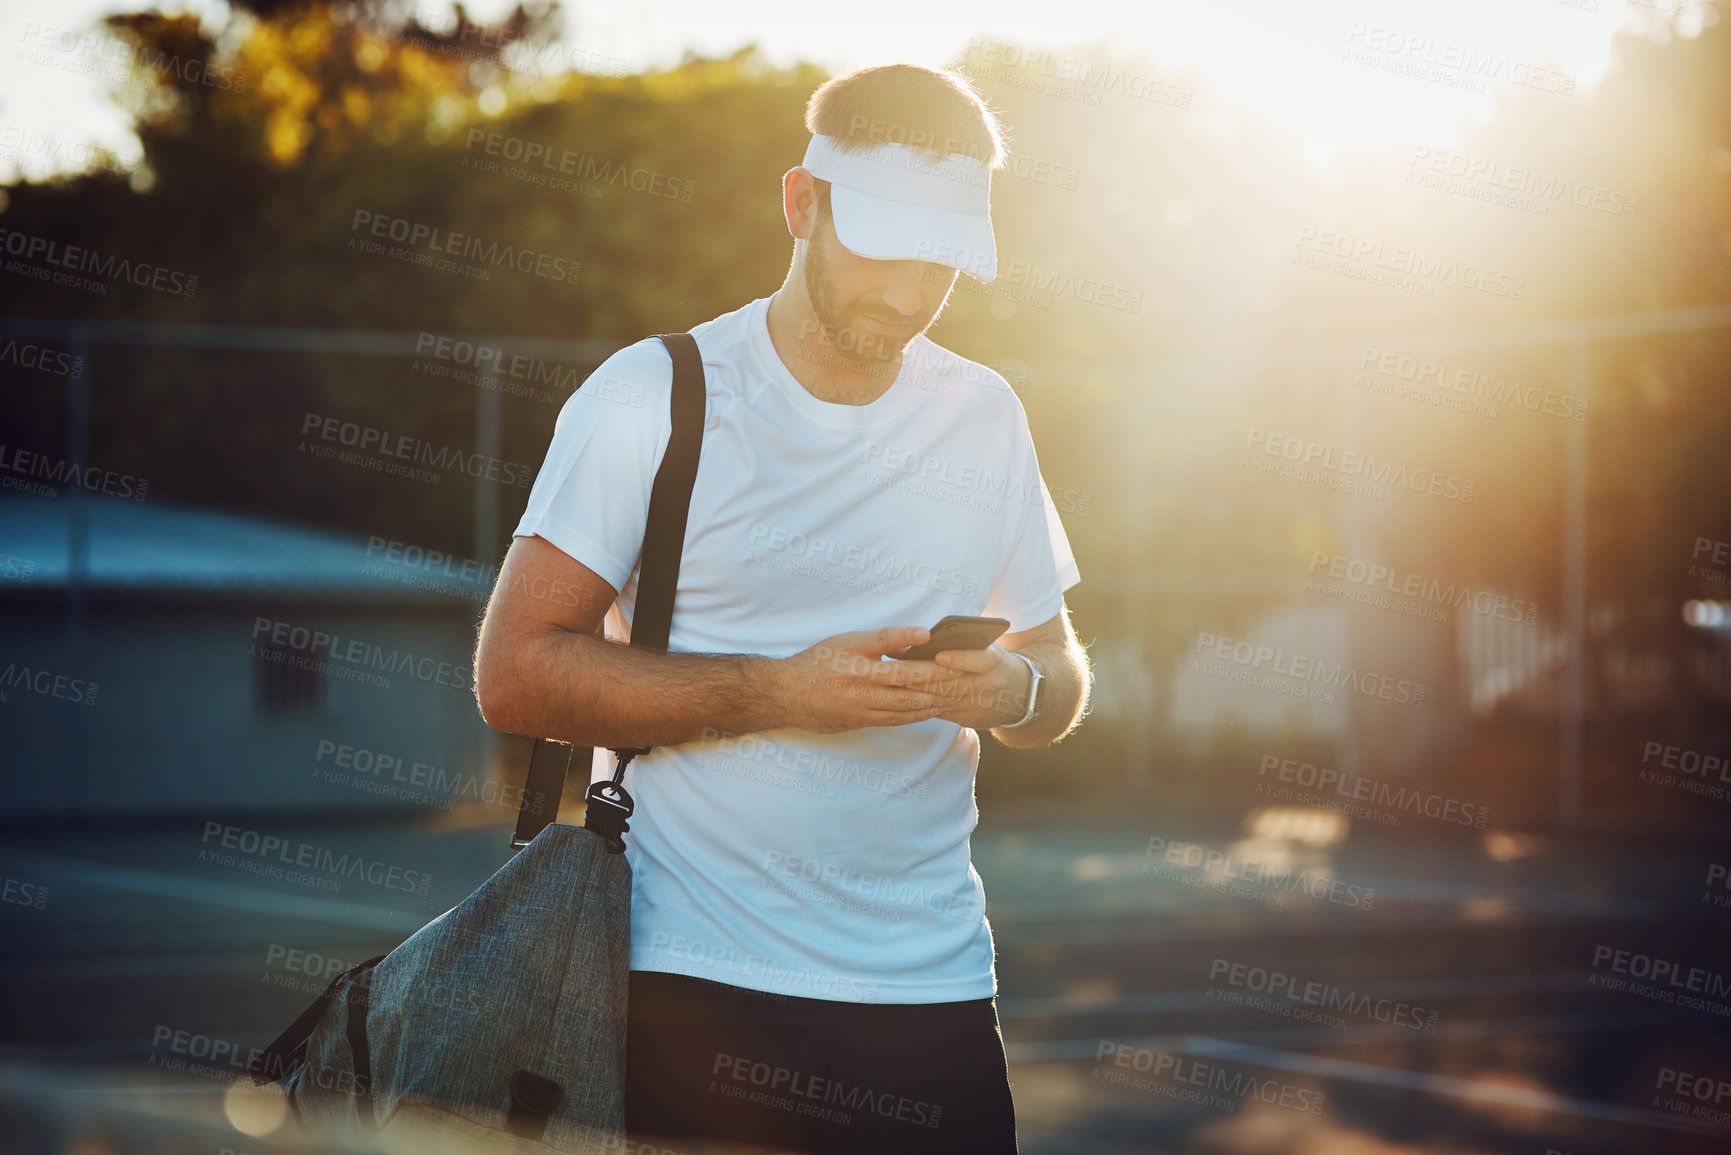 Buy stock photo Shot of a sporty young man using a cellphone while walking on a tennis court